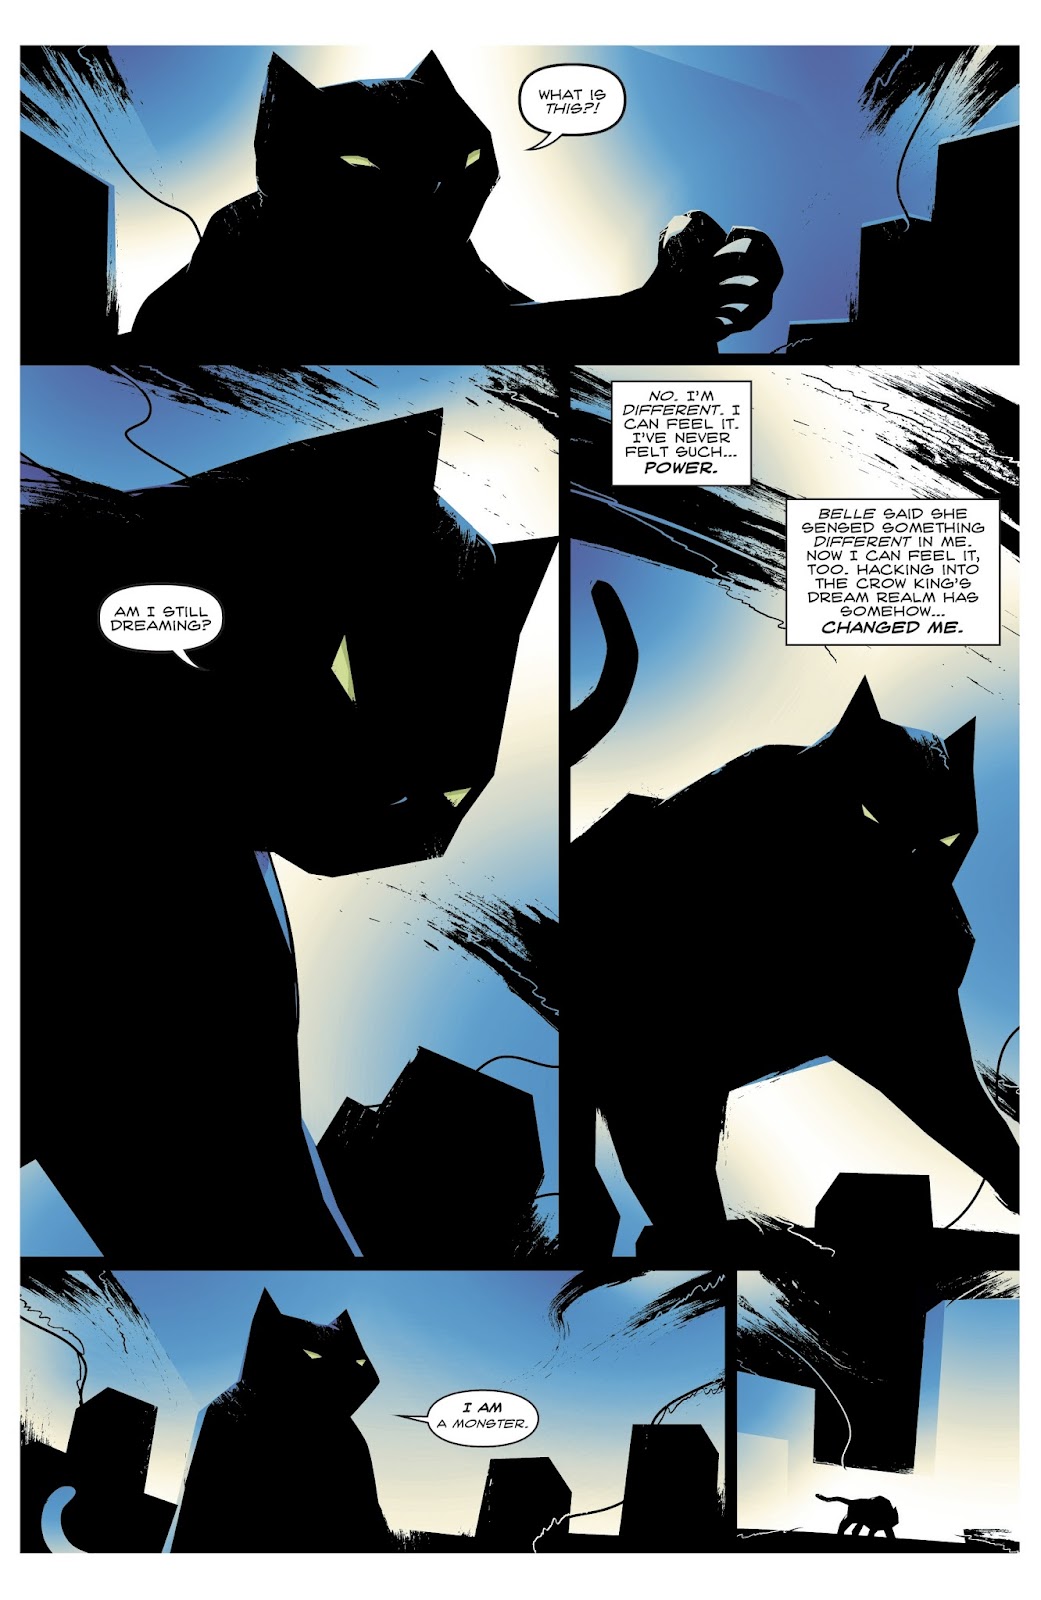 Hero Cats: Midnight Over Stellar City Vol. 2 issue 3 - Page 9